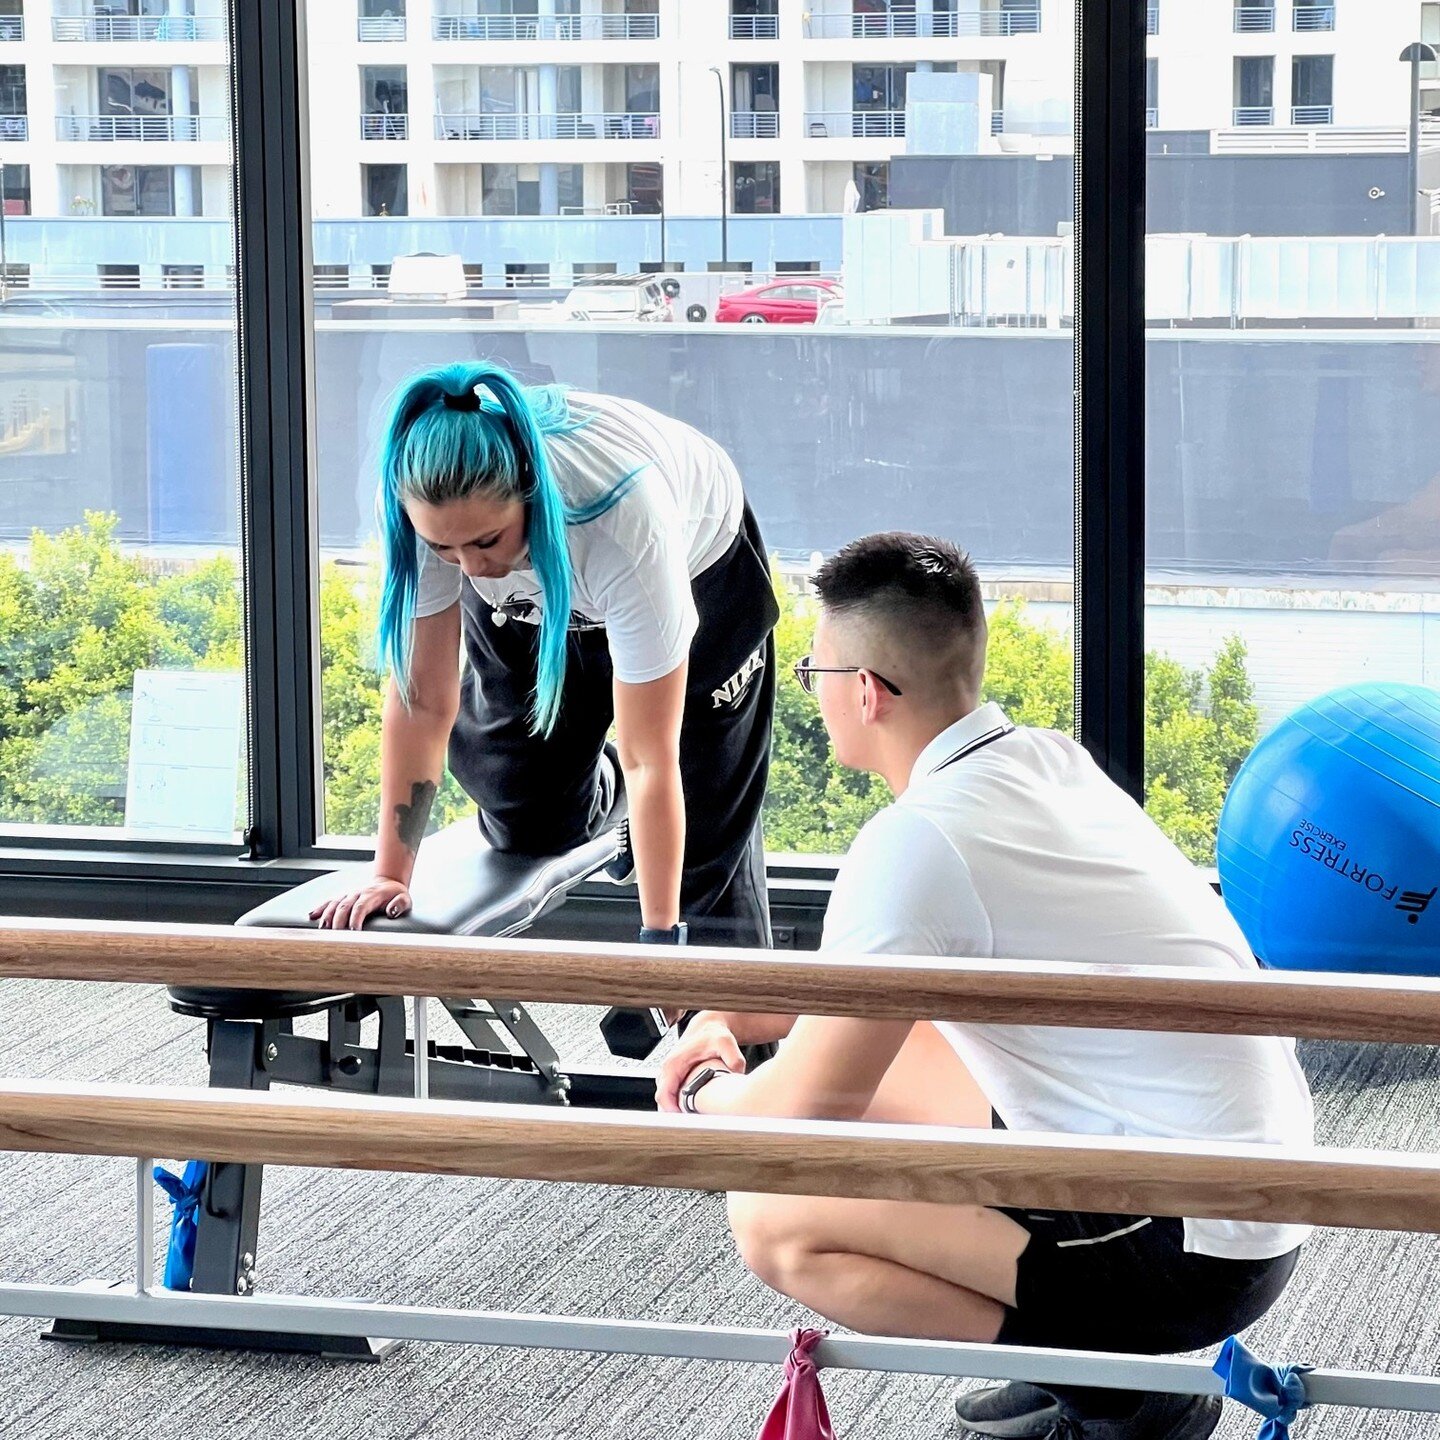 Enhance bone density, manage diabetes, and achieve weight loss goals with Sydney Health Physiotherapy's expert Exercise Physiology services. 

Tailored to integrate with your health team for holistic care. Commit to a healthier you with our evidence-